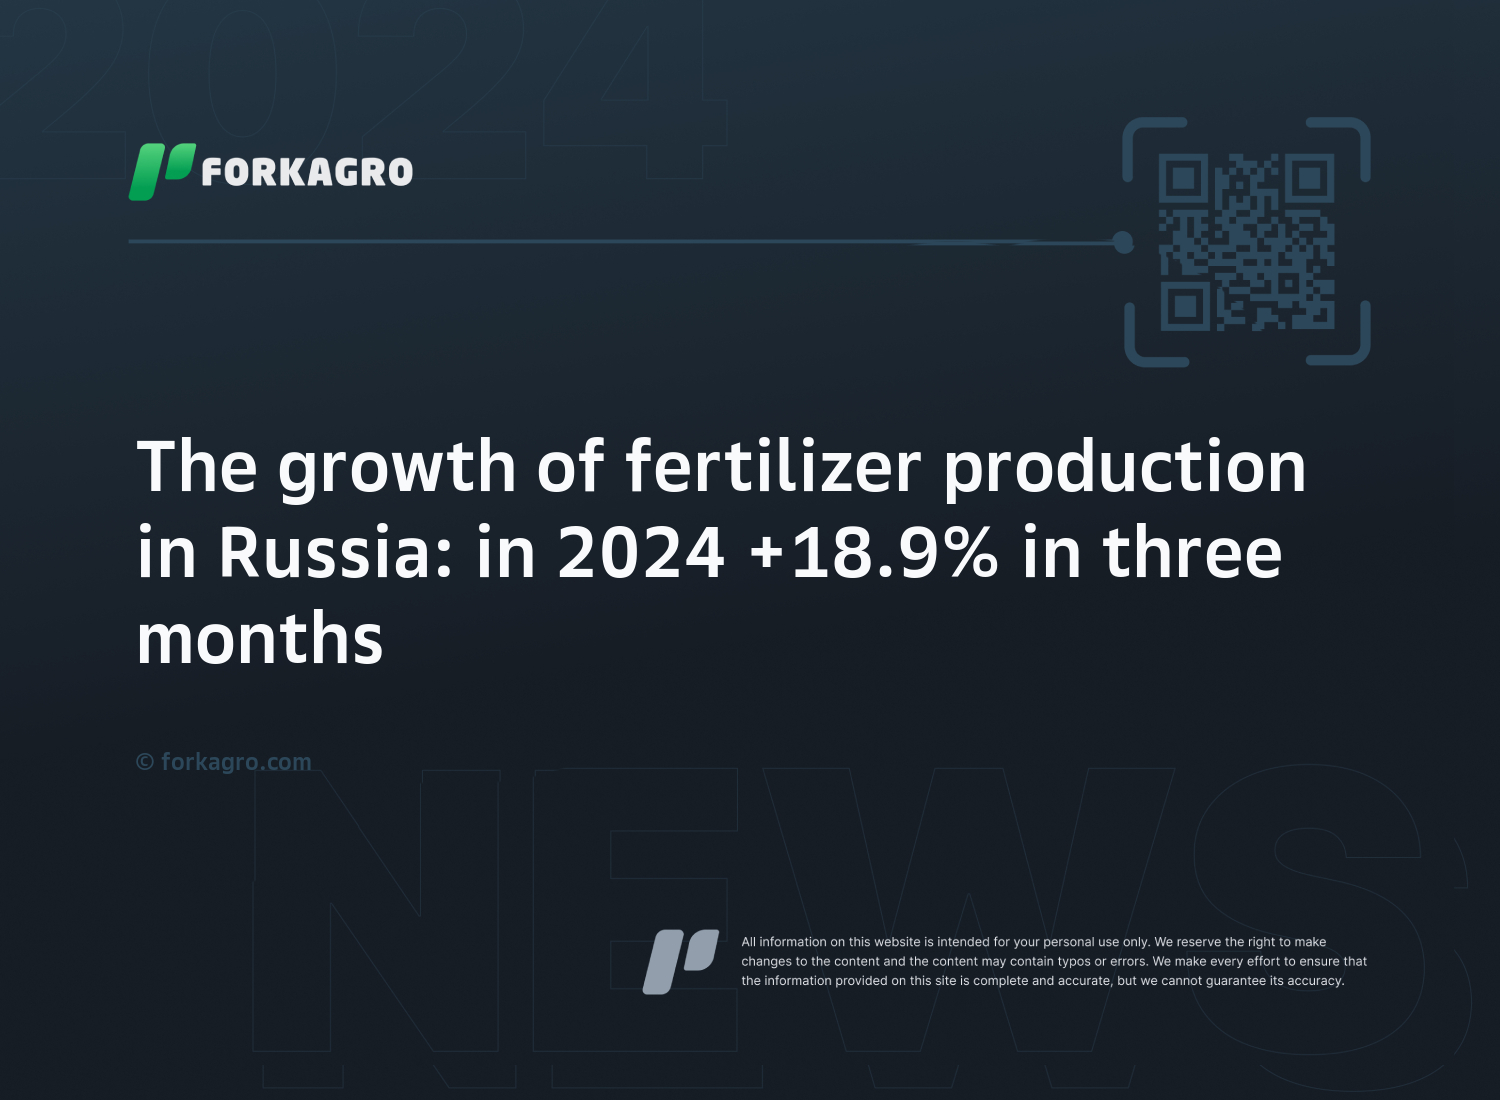 The growth of fertilizer production in Russia: in 2024 +18.9% in three months